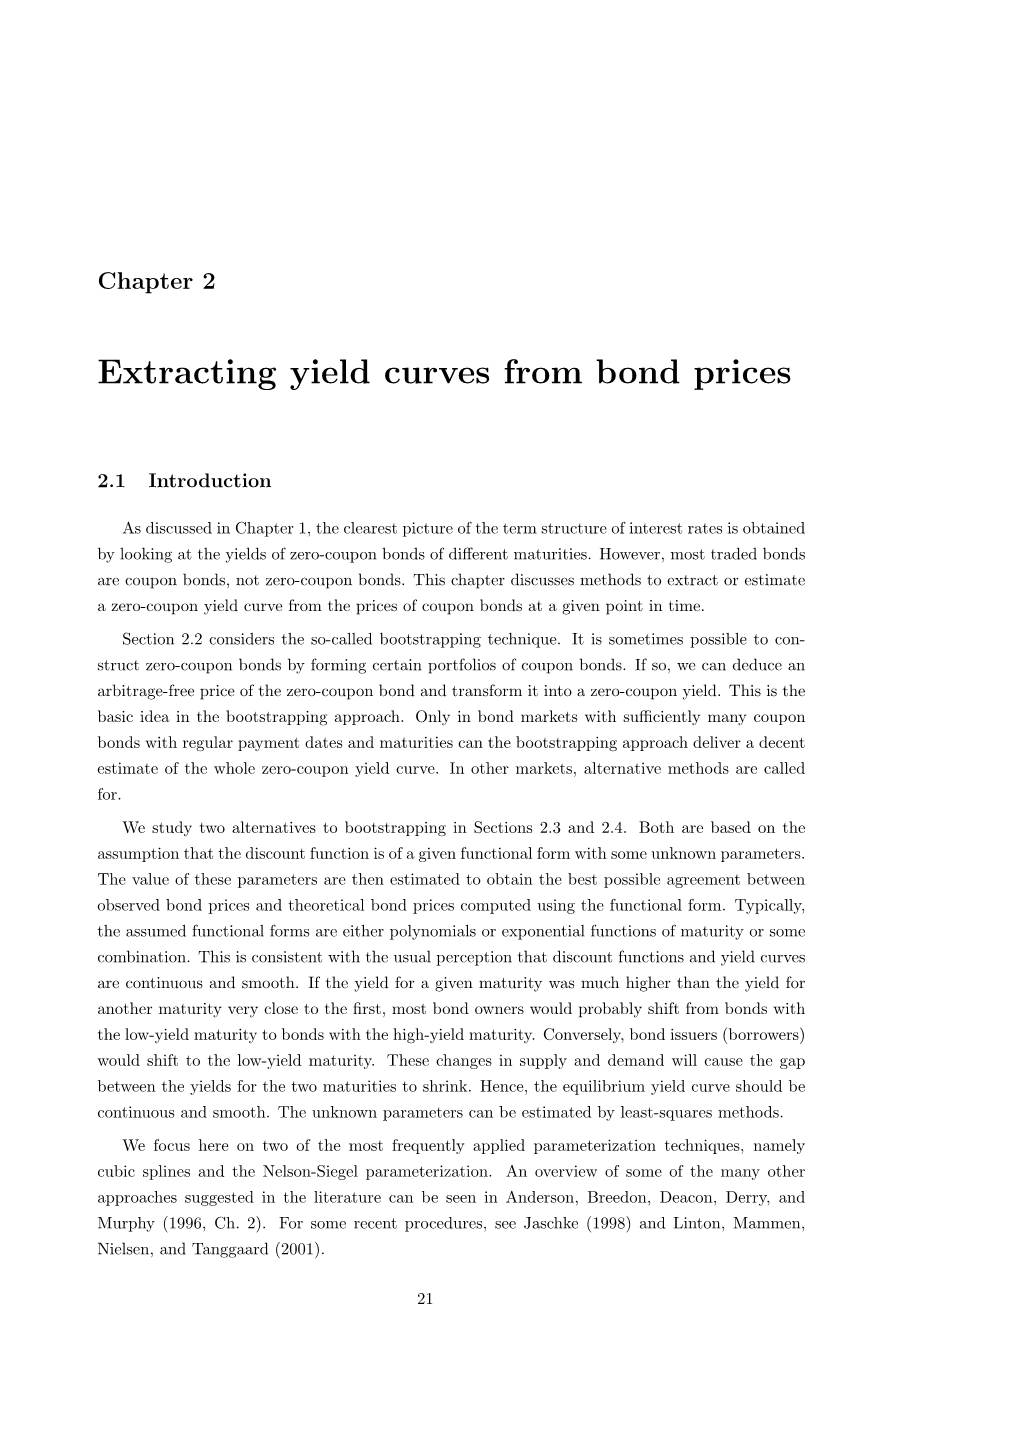 Extracting Yield Curves from Bond Prices